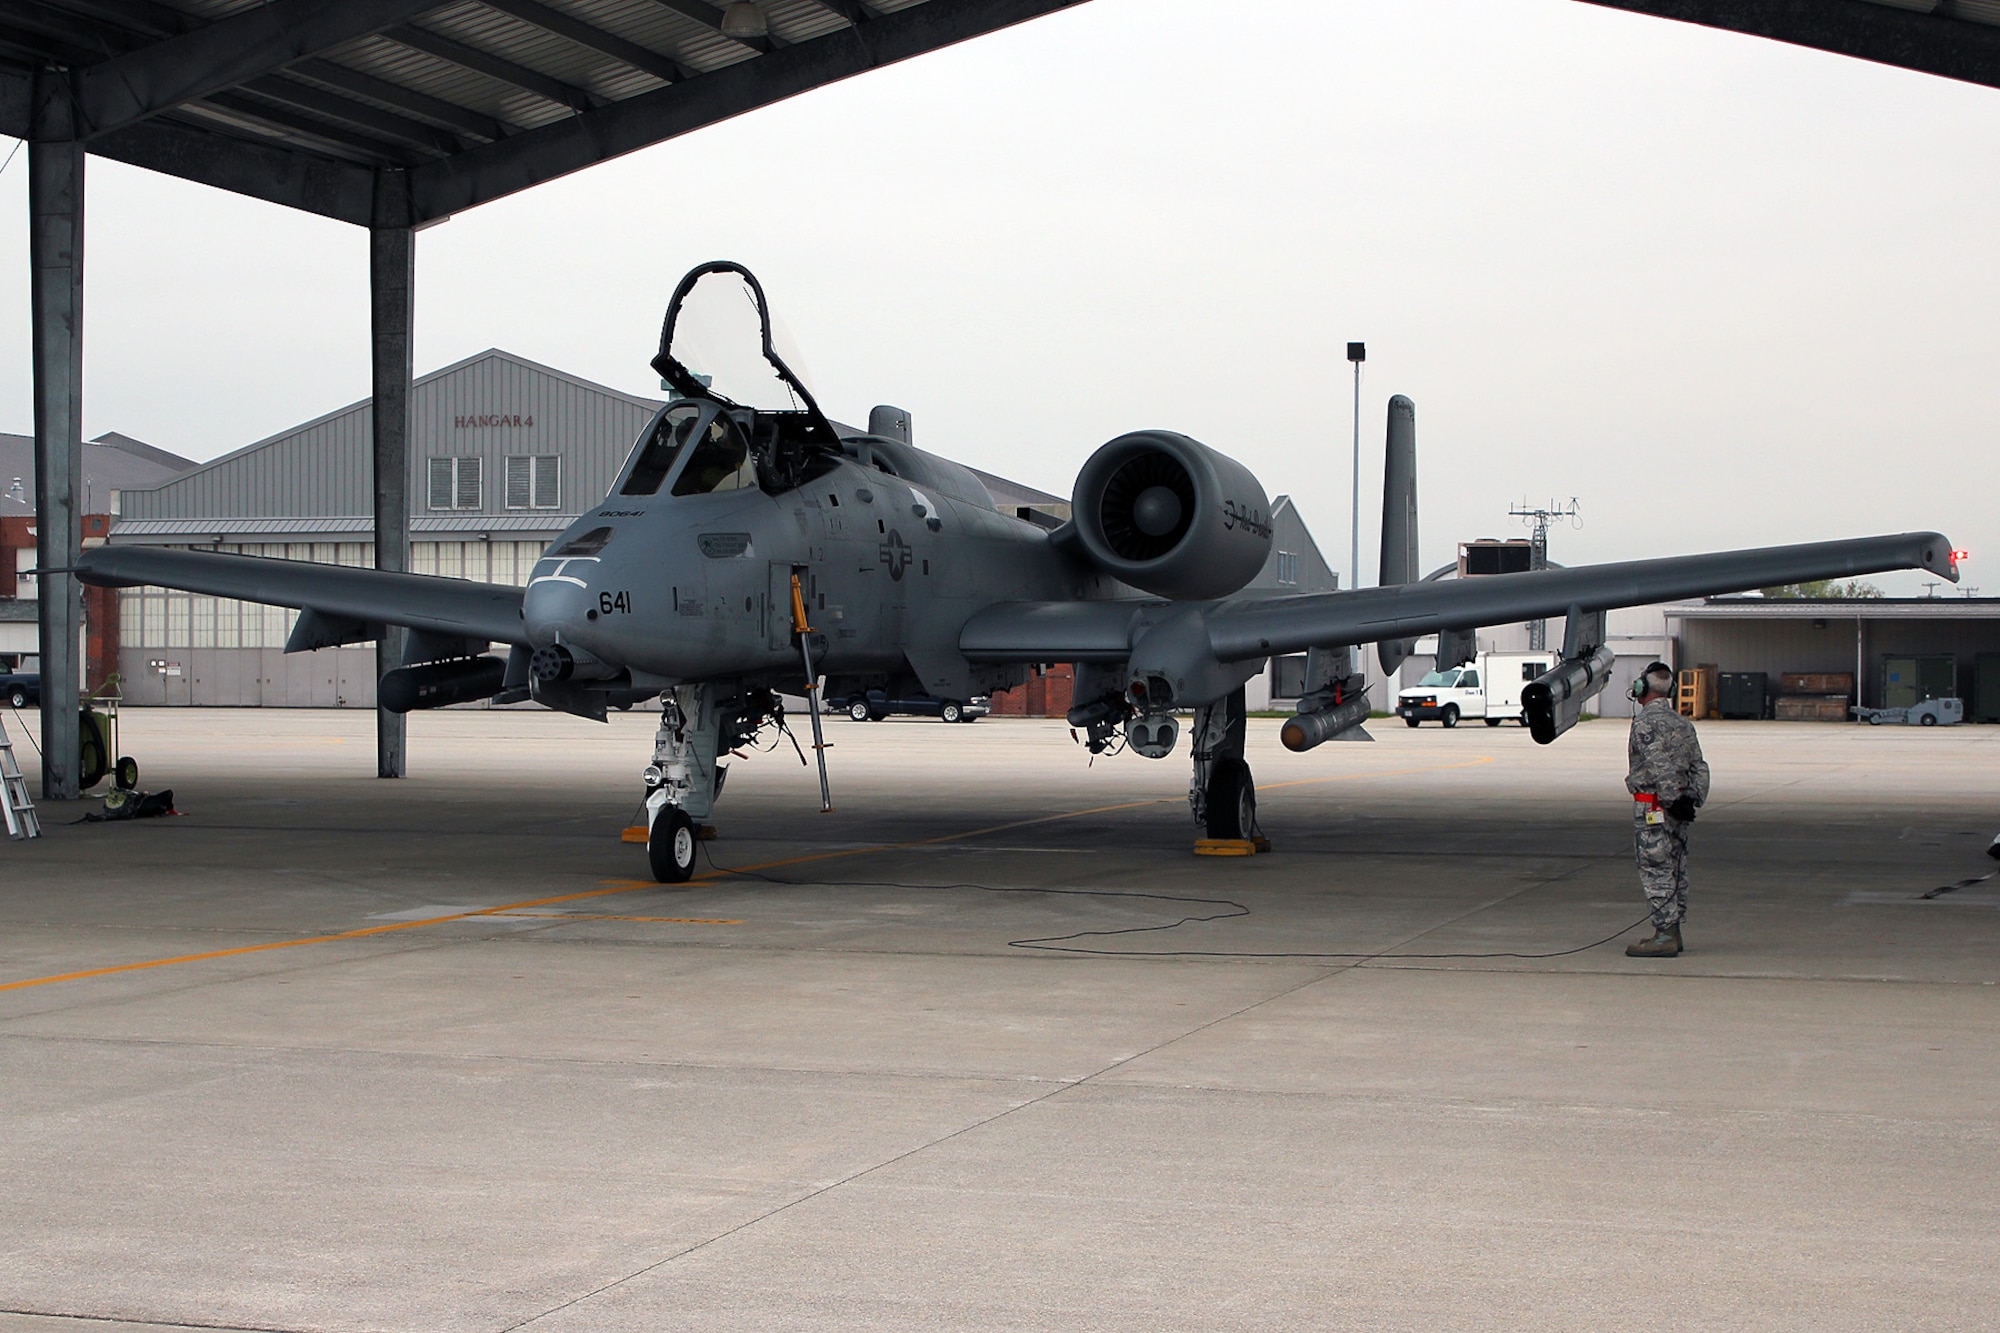 131017-Z-VA676-014 – A crew chief watches as an A-10 Thunderbolt II is prepared for take off at Selfridge Air National Guard Base, Mich., Oct. 17, 2013. The sorties generated at Selfridge on Oct. 17 were the first for the 127th Wing at the base since before the partial government shutdown began on Oct. 1. Selfridge personnel launched both A-10s and KC-135 Stratotankers on Oct. 17. (Air National Guard photo by TSgt. Dan Heaton / Released)